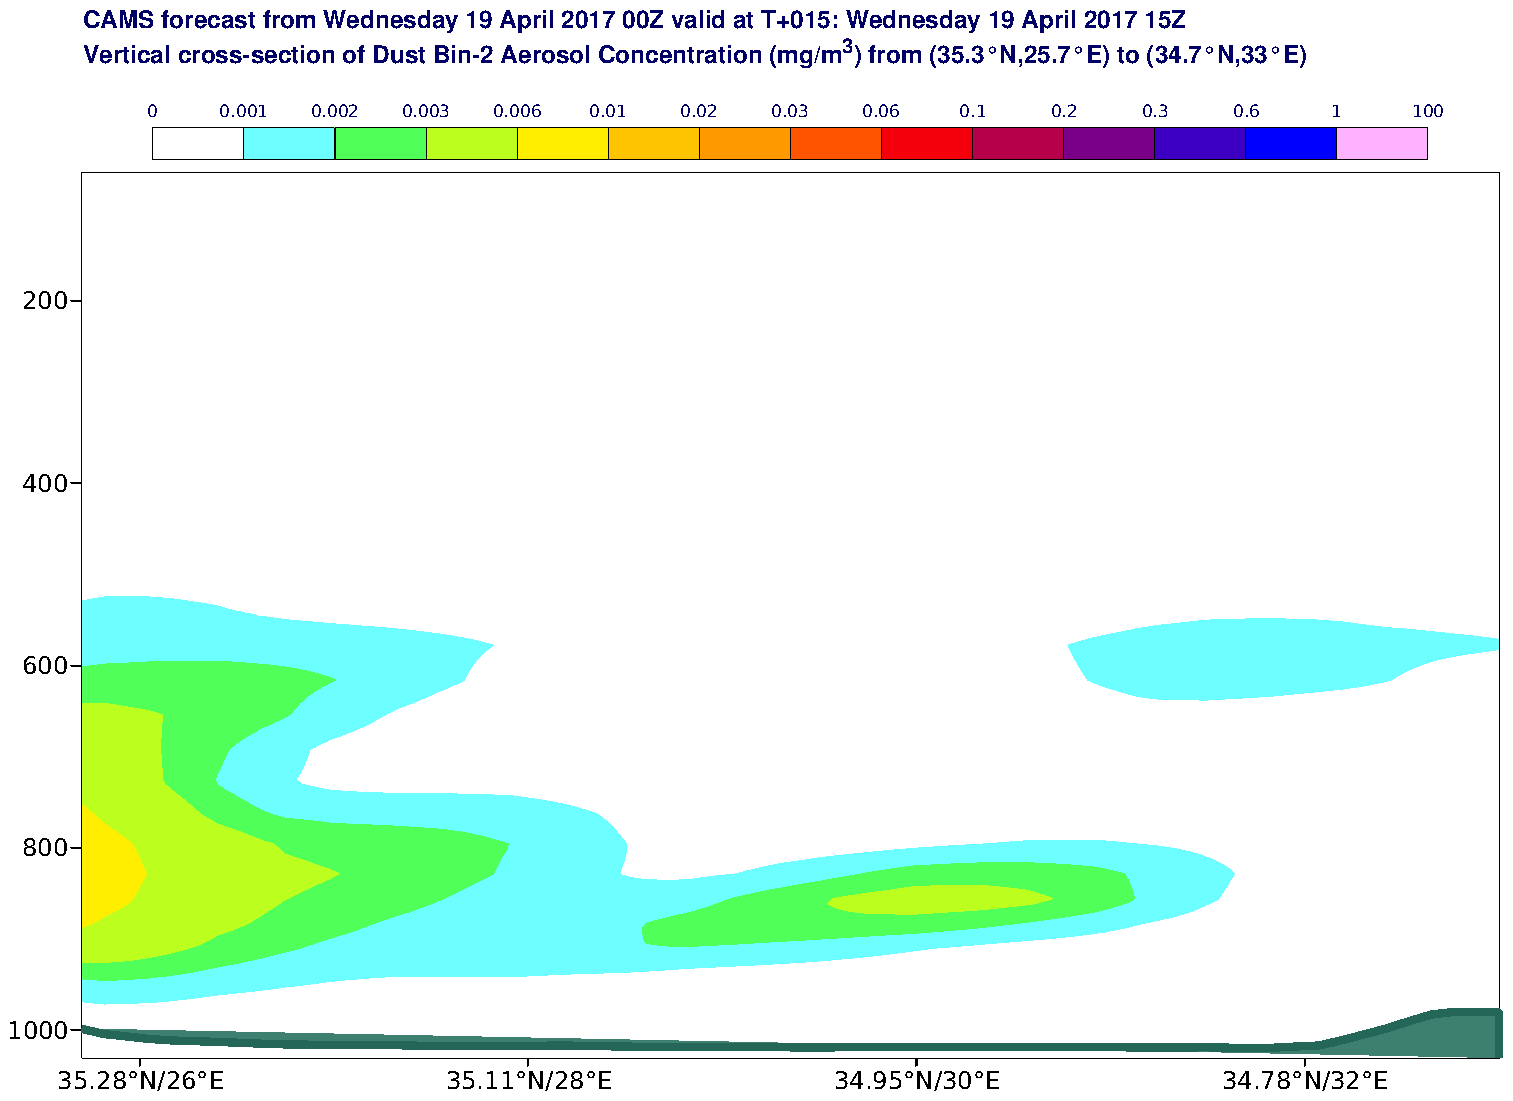 Vertical cross-section of Dust Bin-2 Aerosol Concentration (mg/m3) valid at T15 - 2017-04-19 15:00